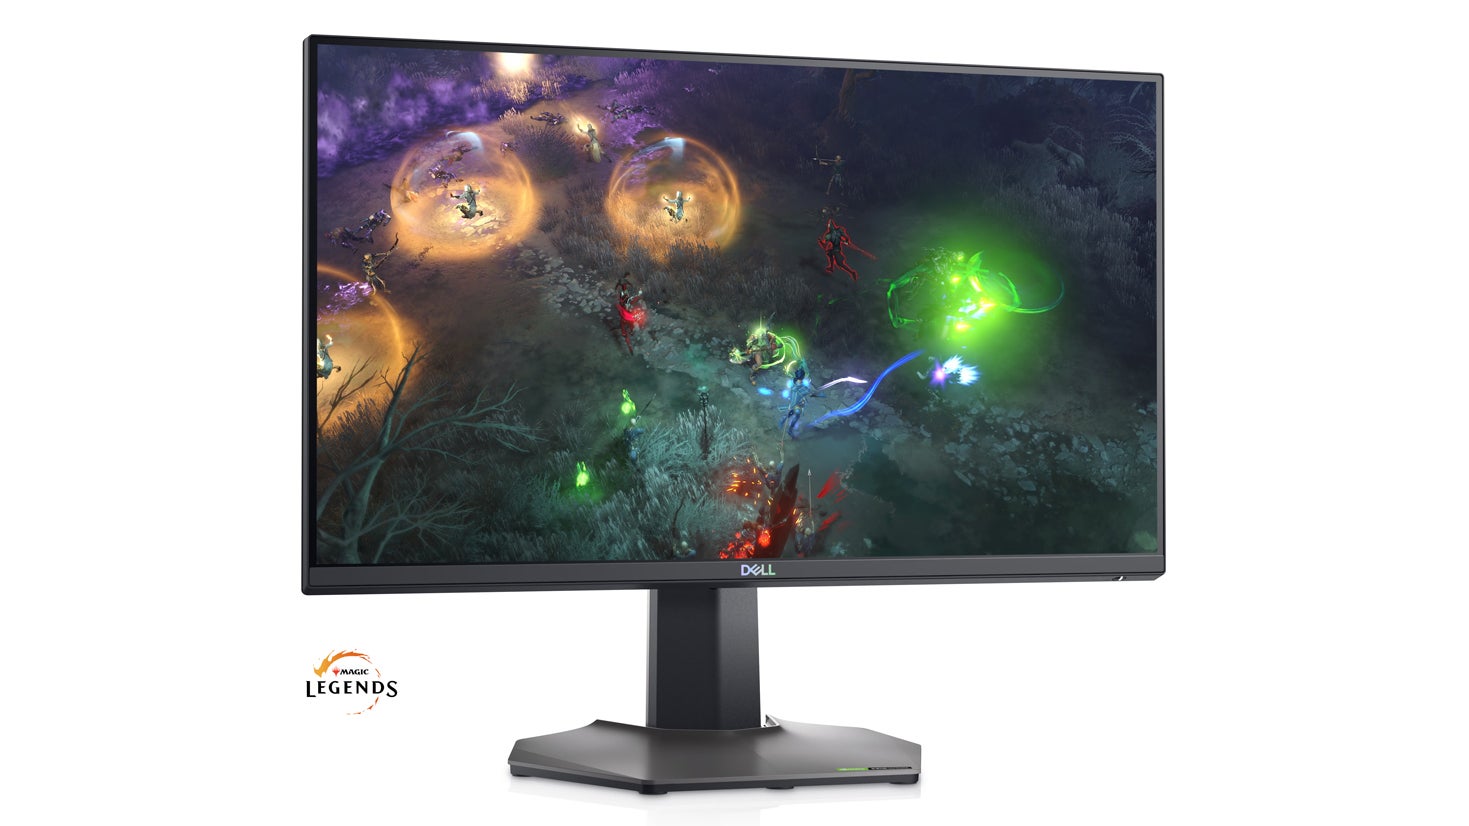 Two top-tier Dell gaming monitors get Black Friday discounts today